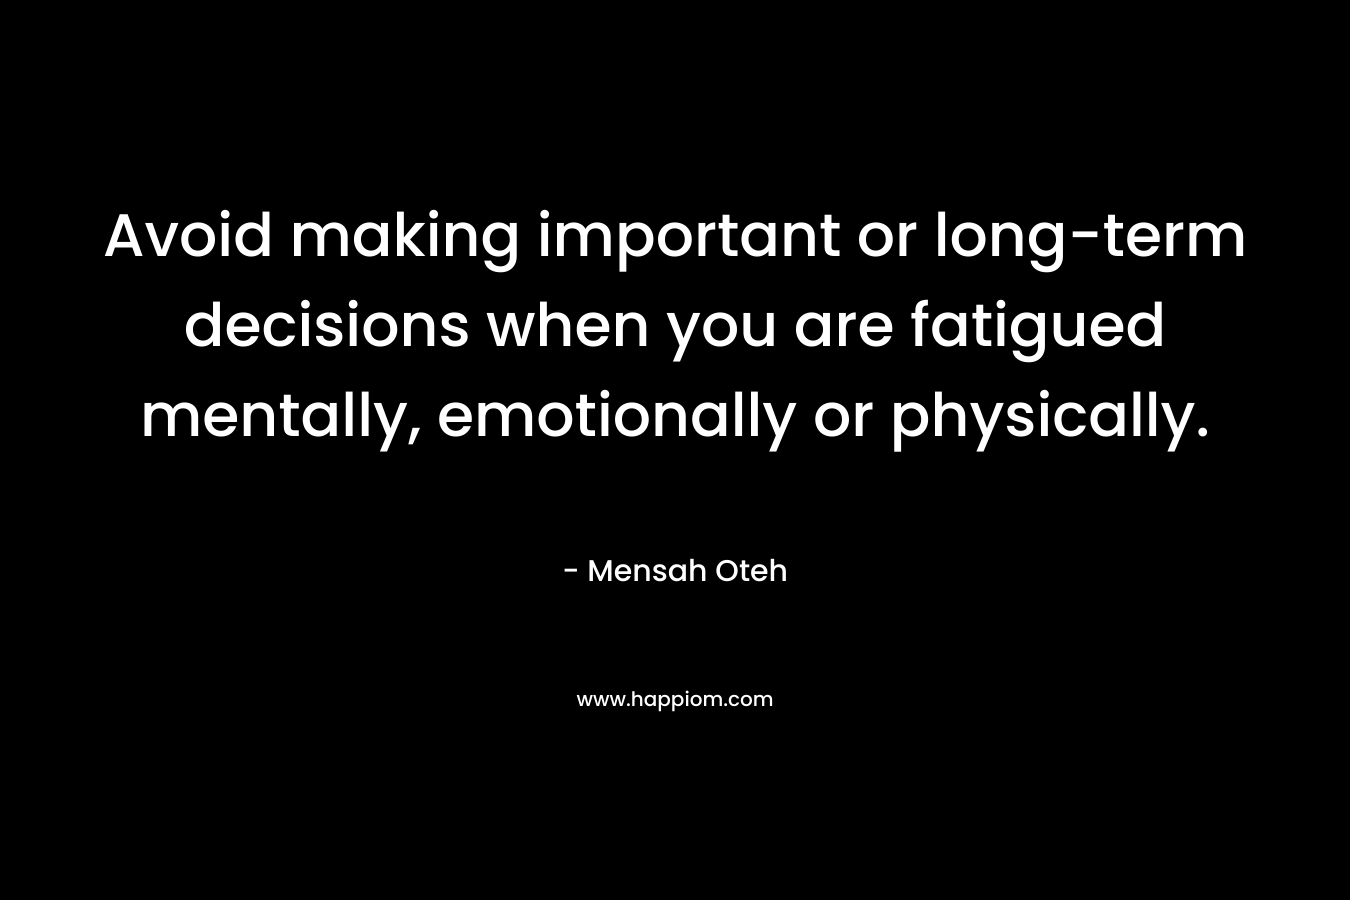 Avoid making important or long-term decisions when you are fatigued mentally, emotionally or physically.